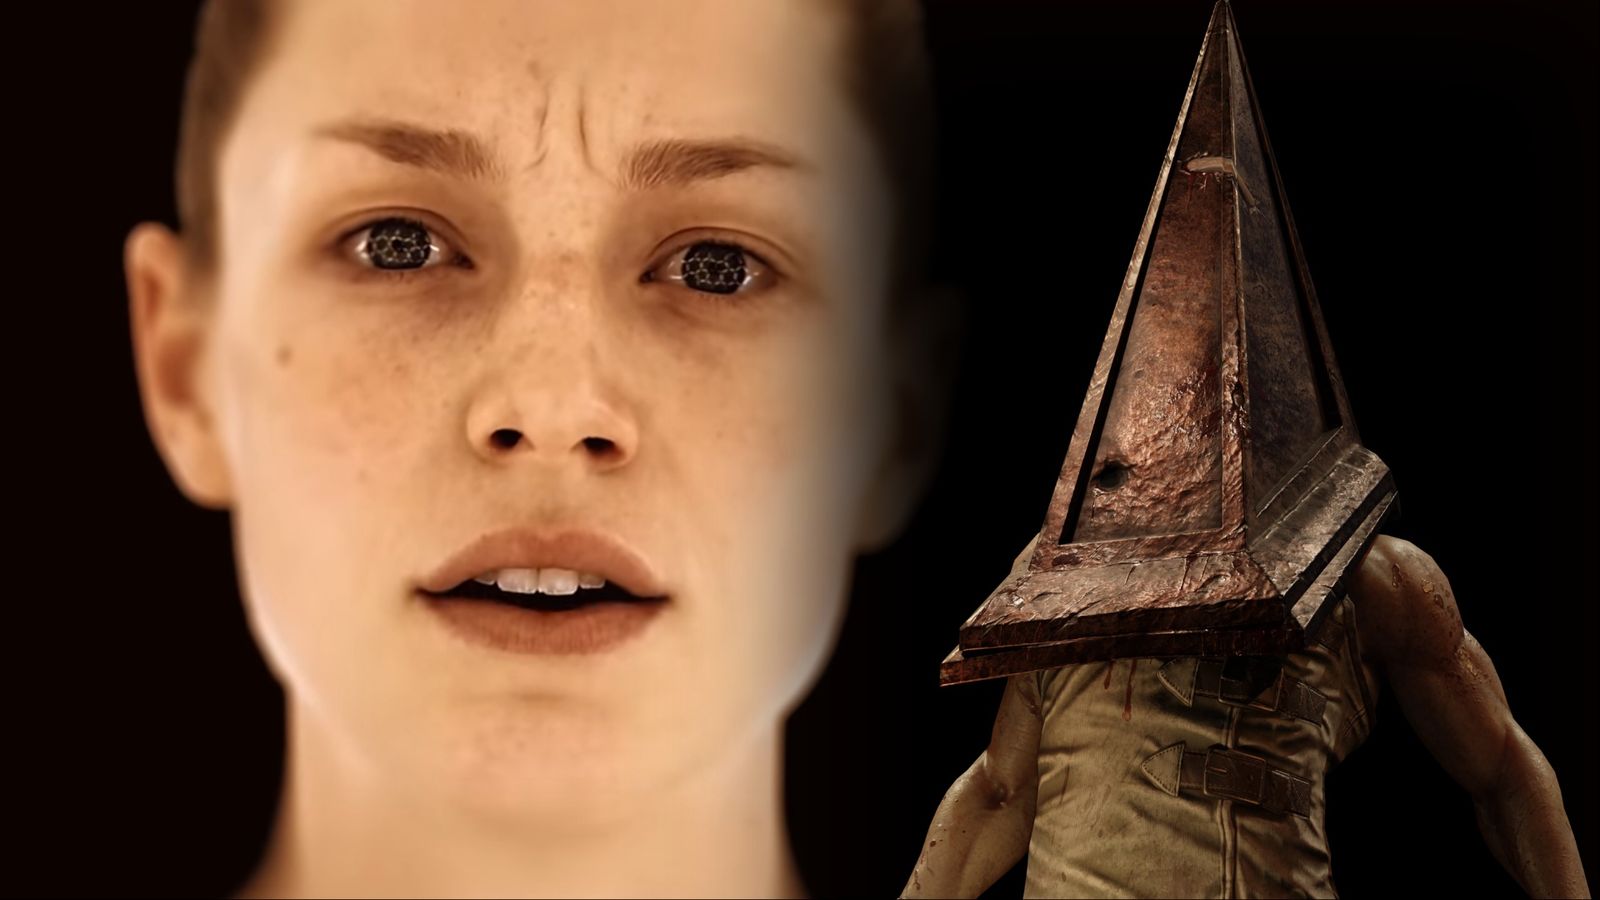 OD character looking concerned while Silent Hill character Pyramid head stands nearby